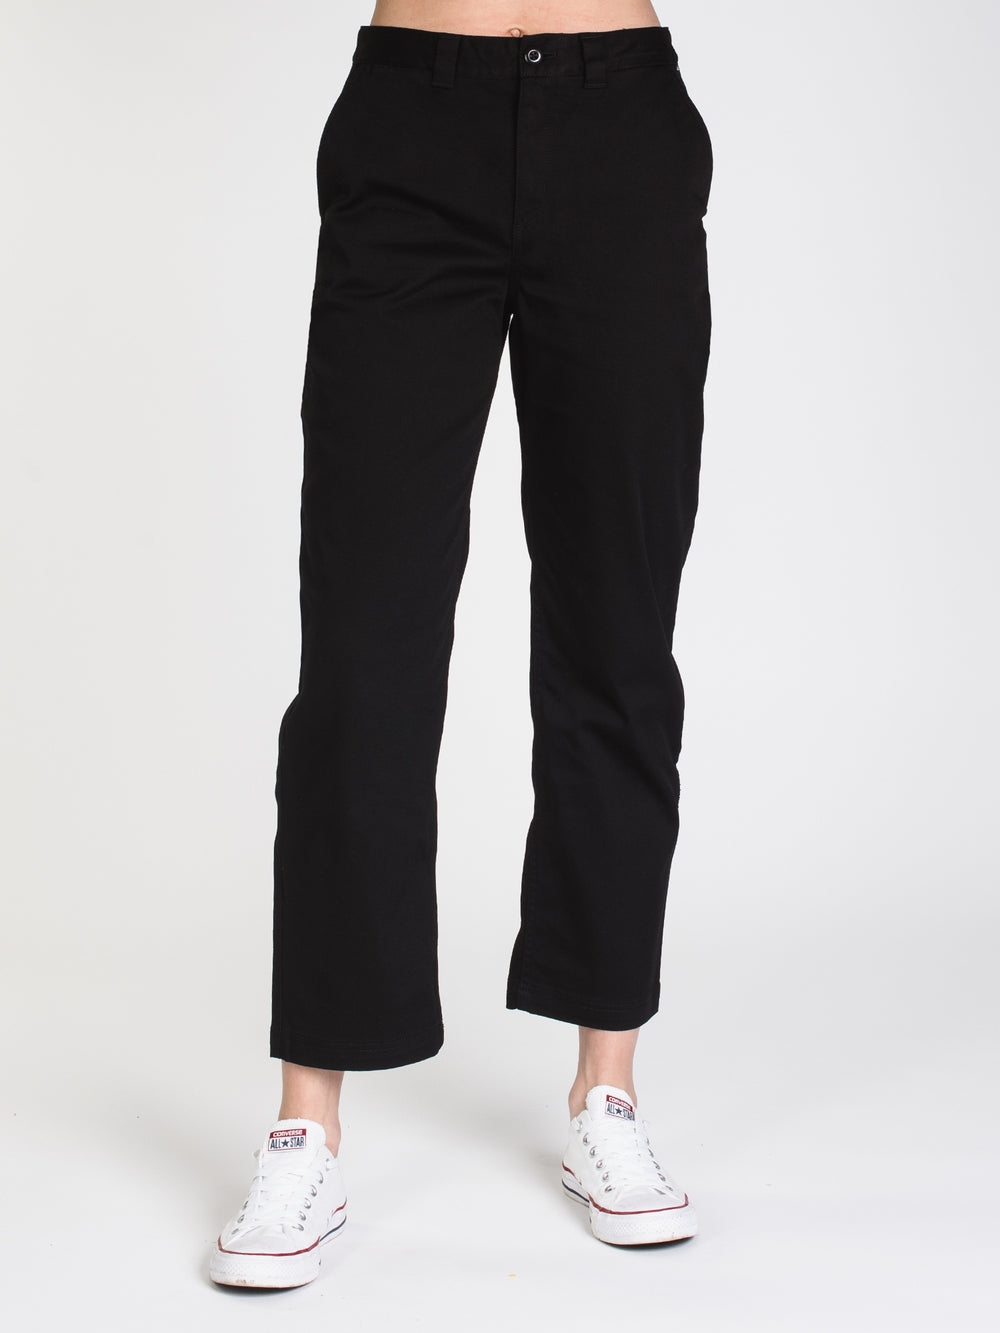 WOMENS AUTH CHINO PANT - BLACK - CLEARANCE